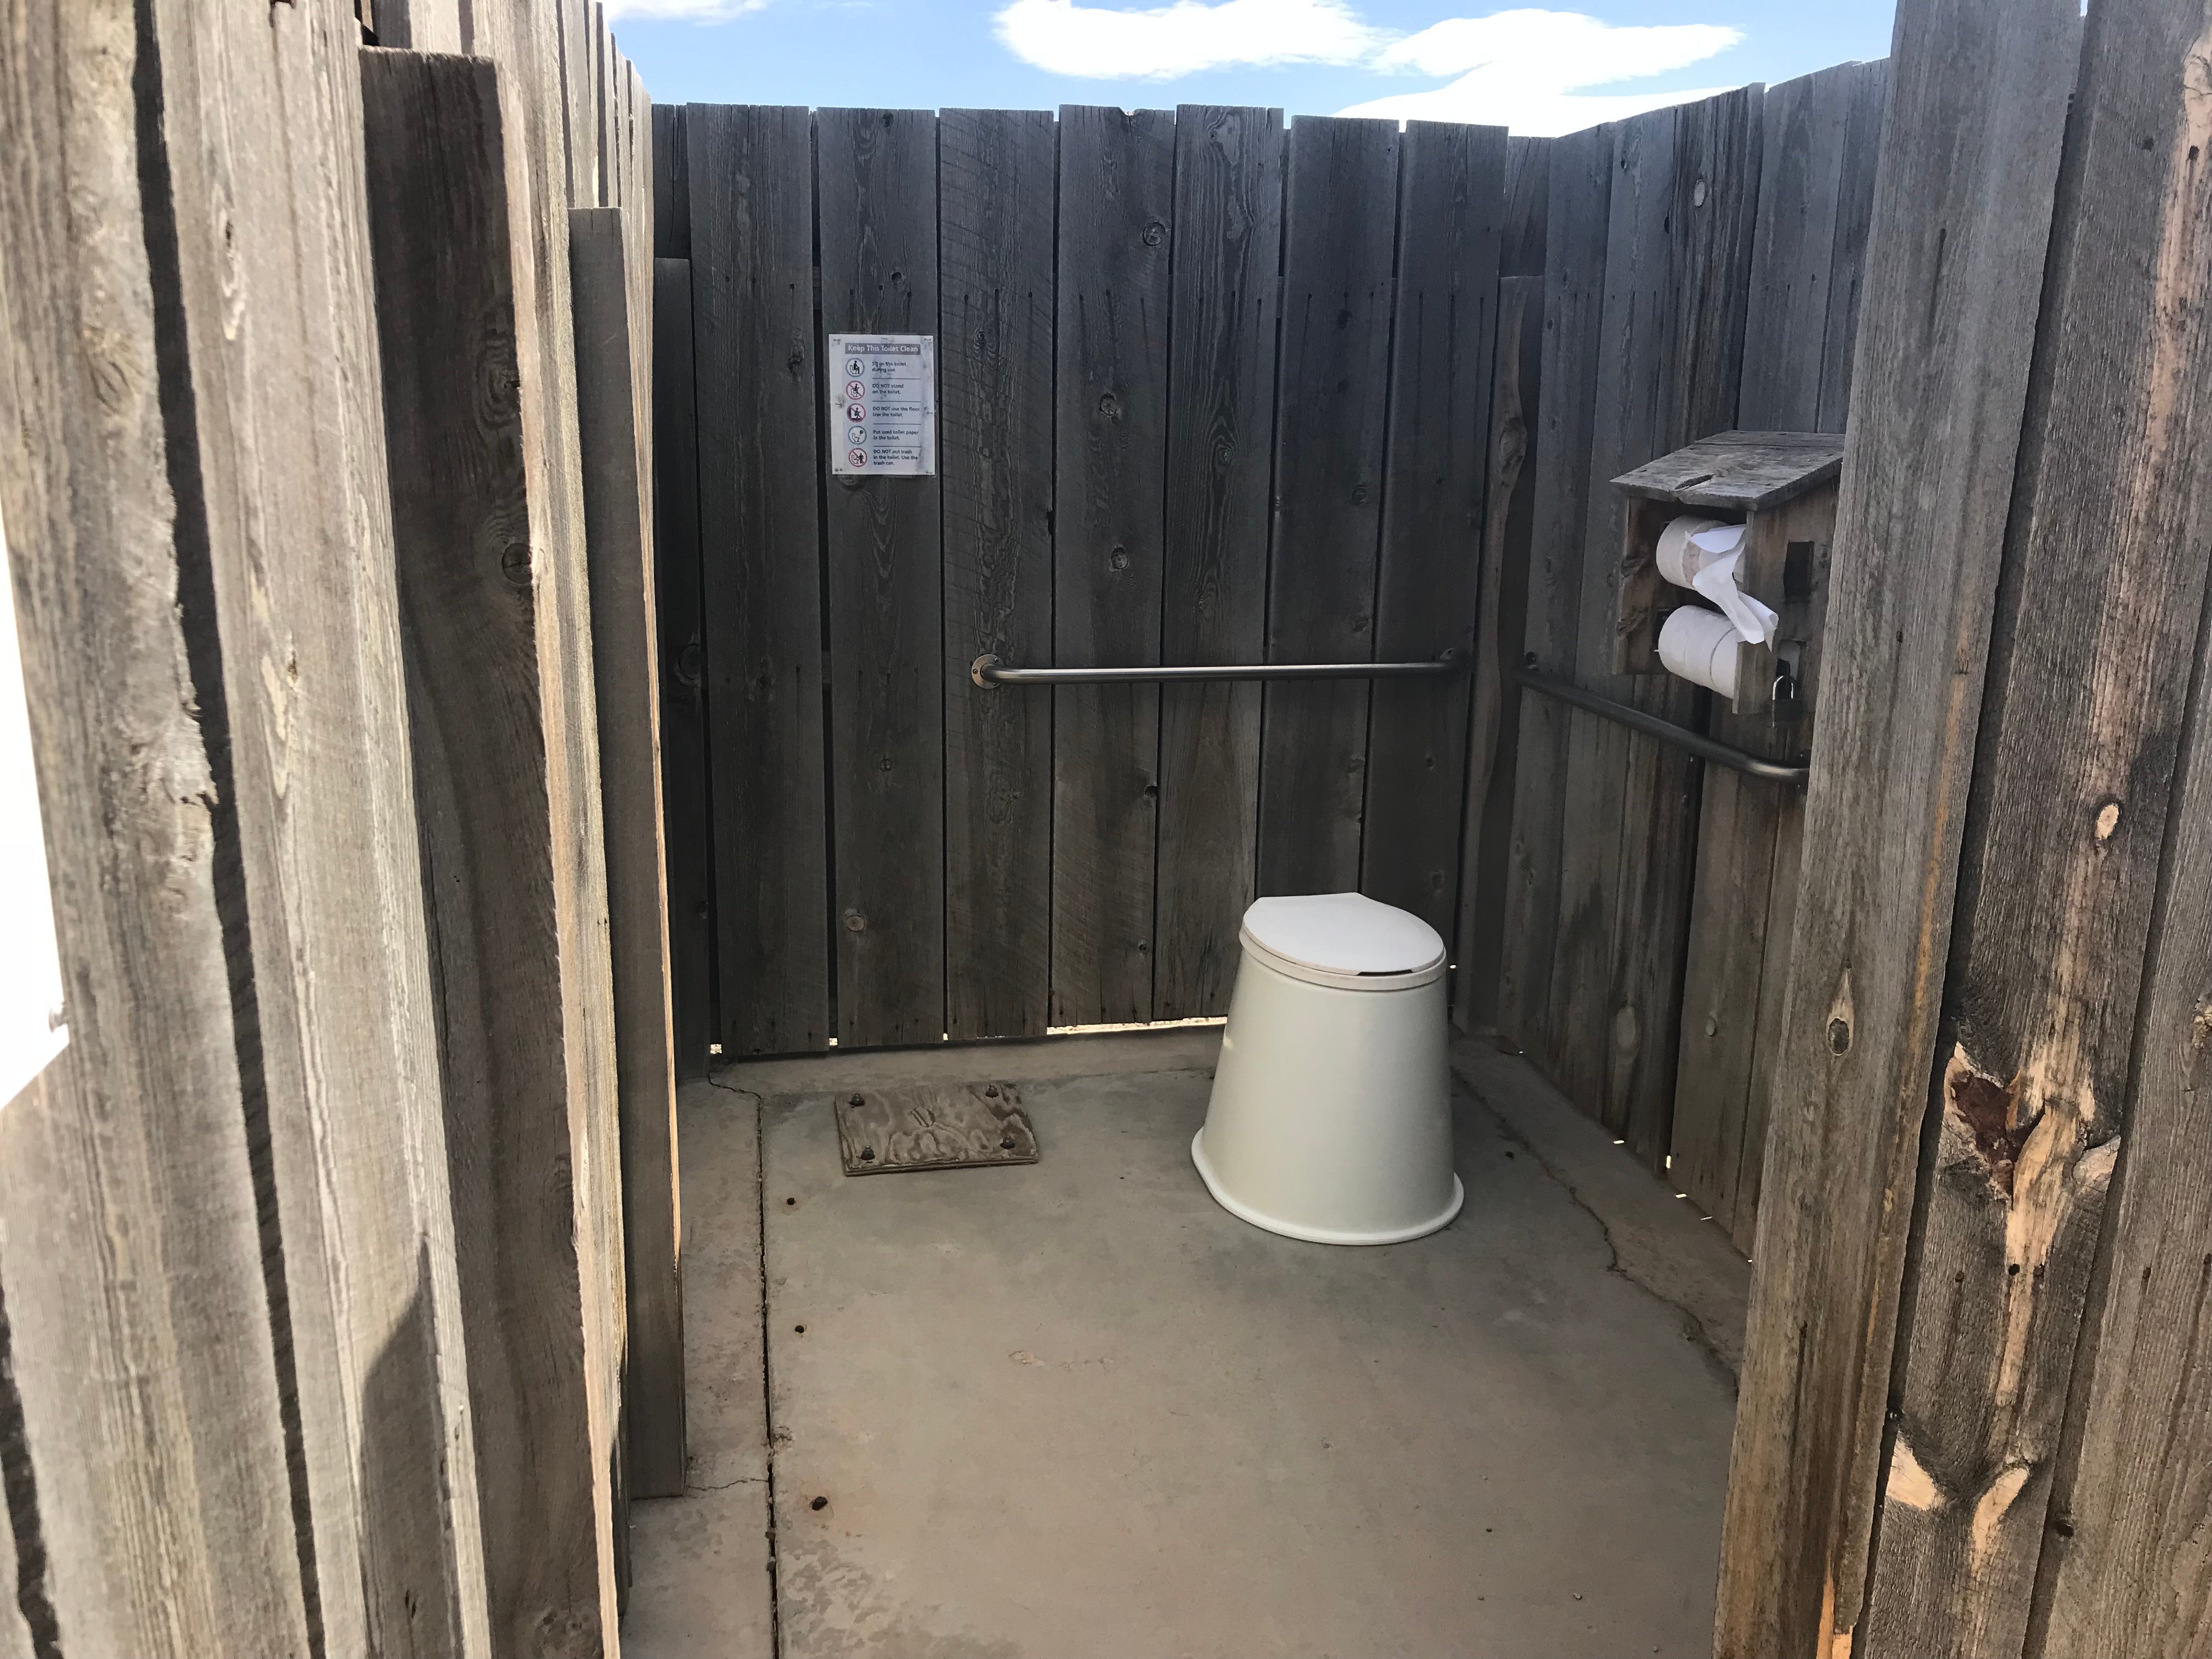 Open air pit toilet.  Not for everyone but going under the stars in privacy can be refreshing.